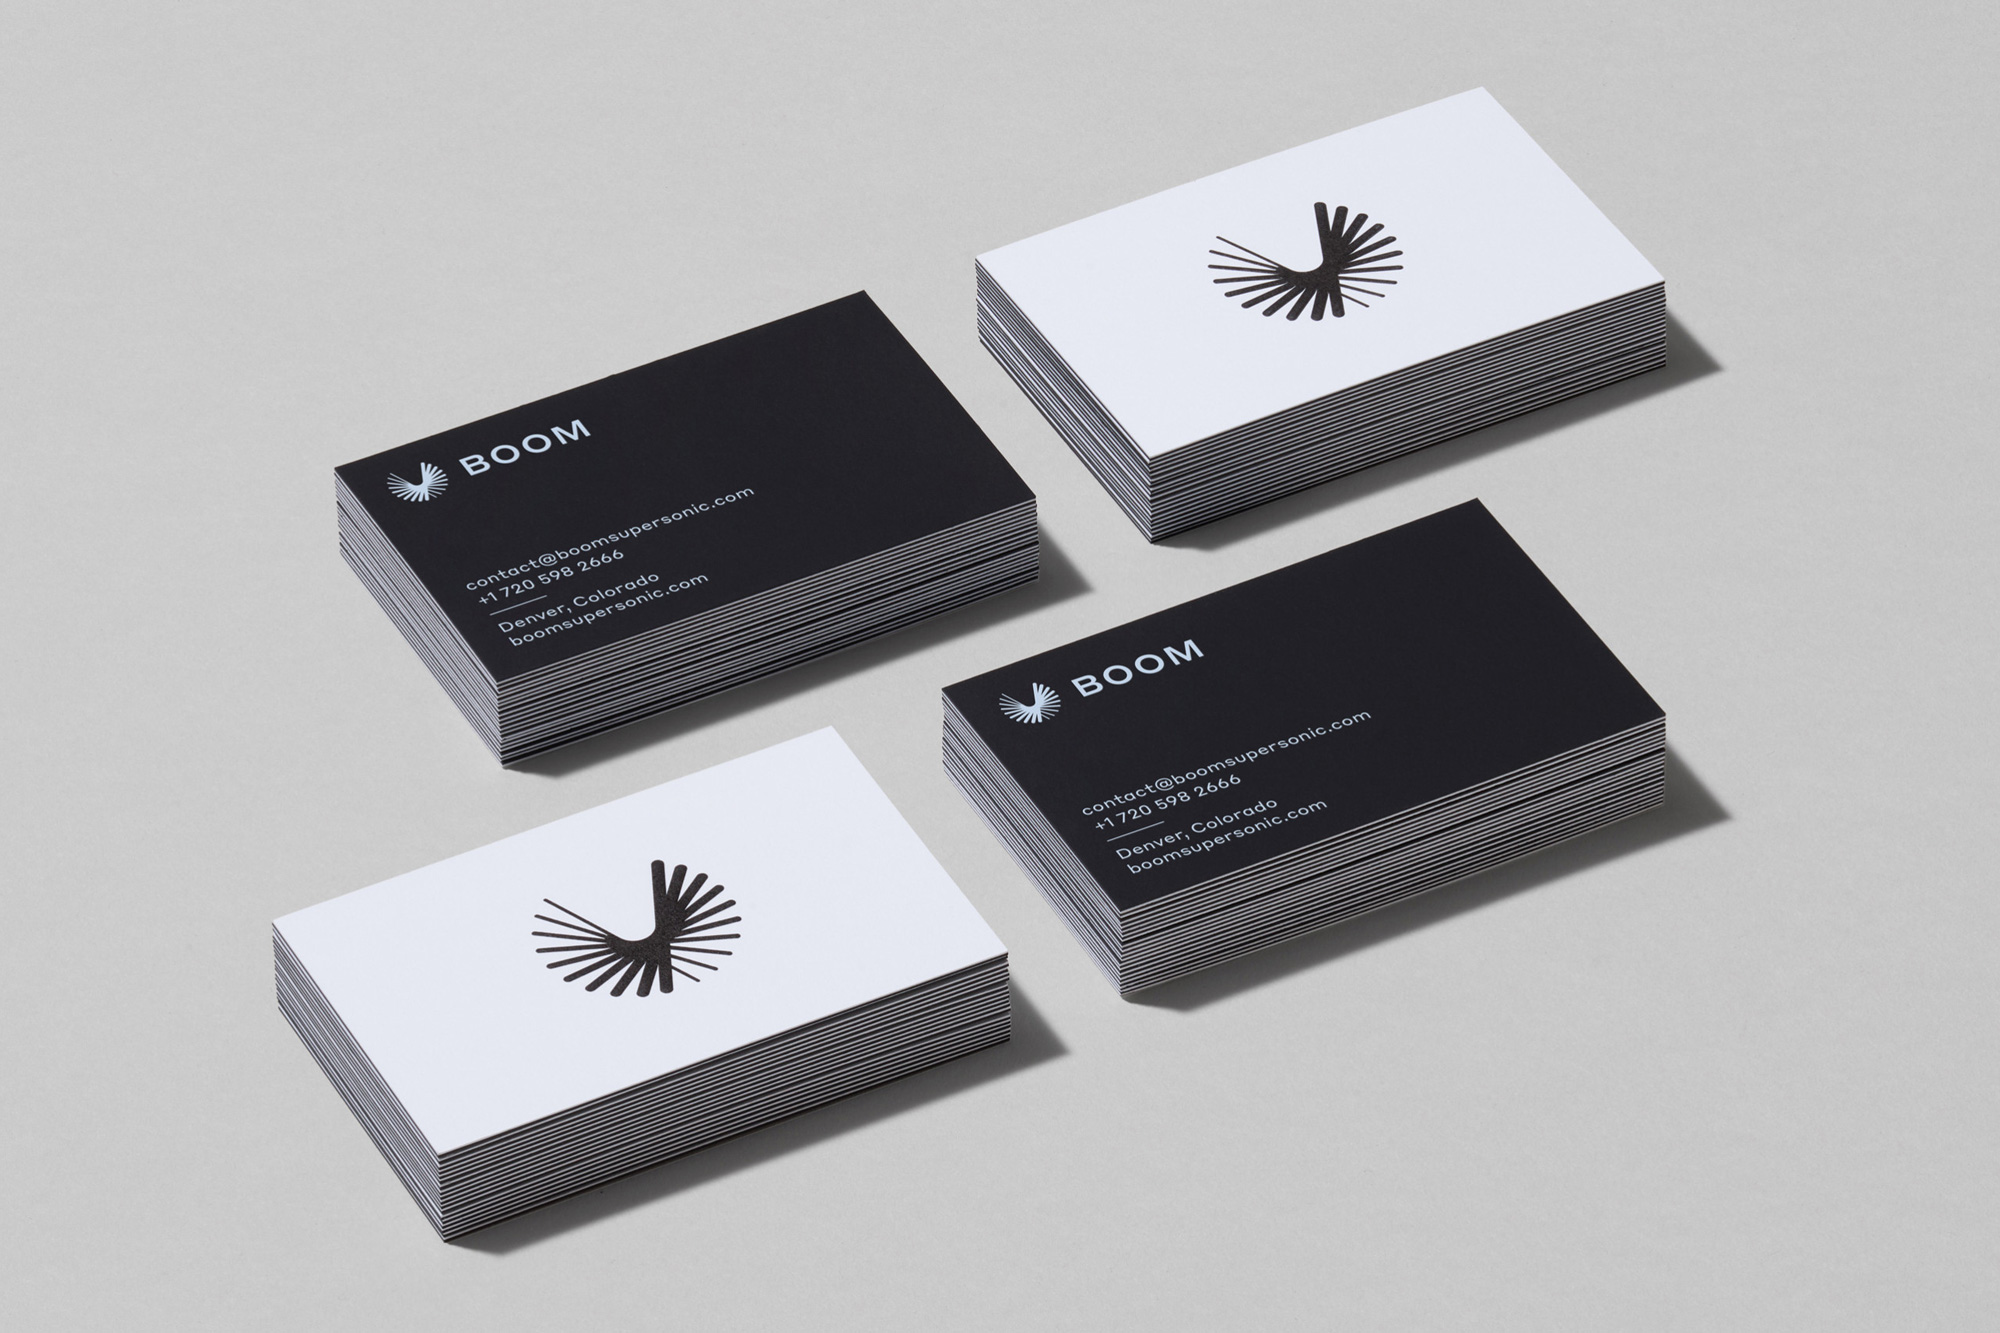 Brand New: New Logo and Identity for Boom by Manual